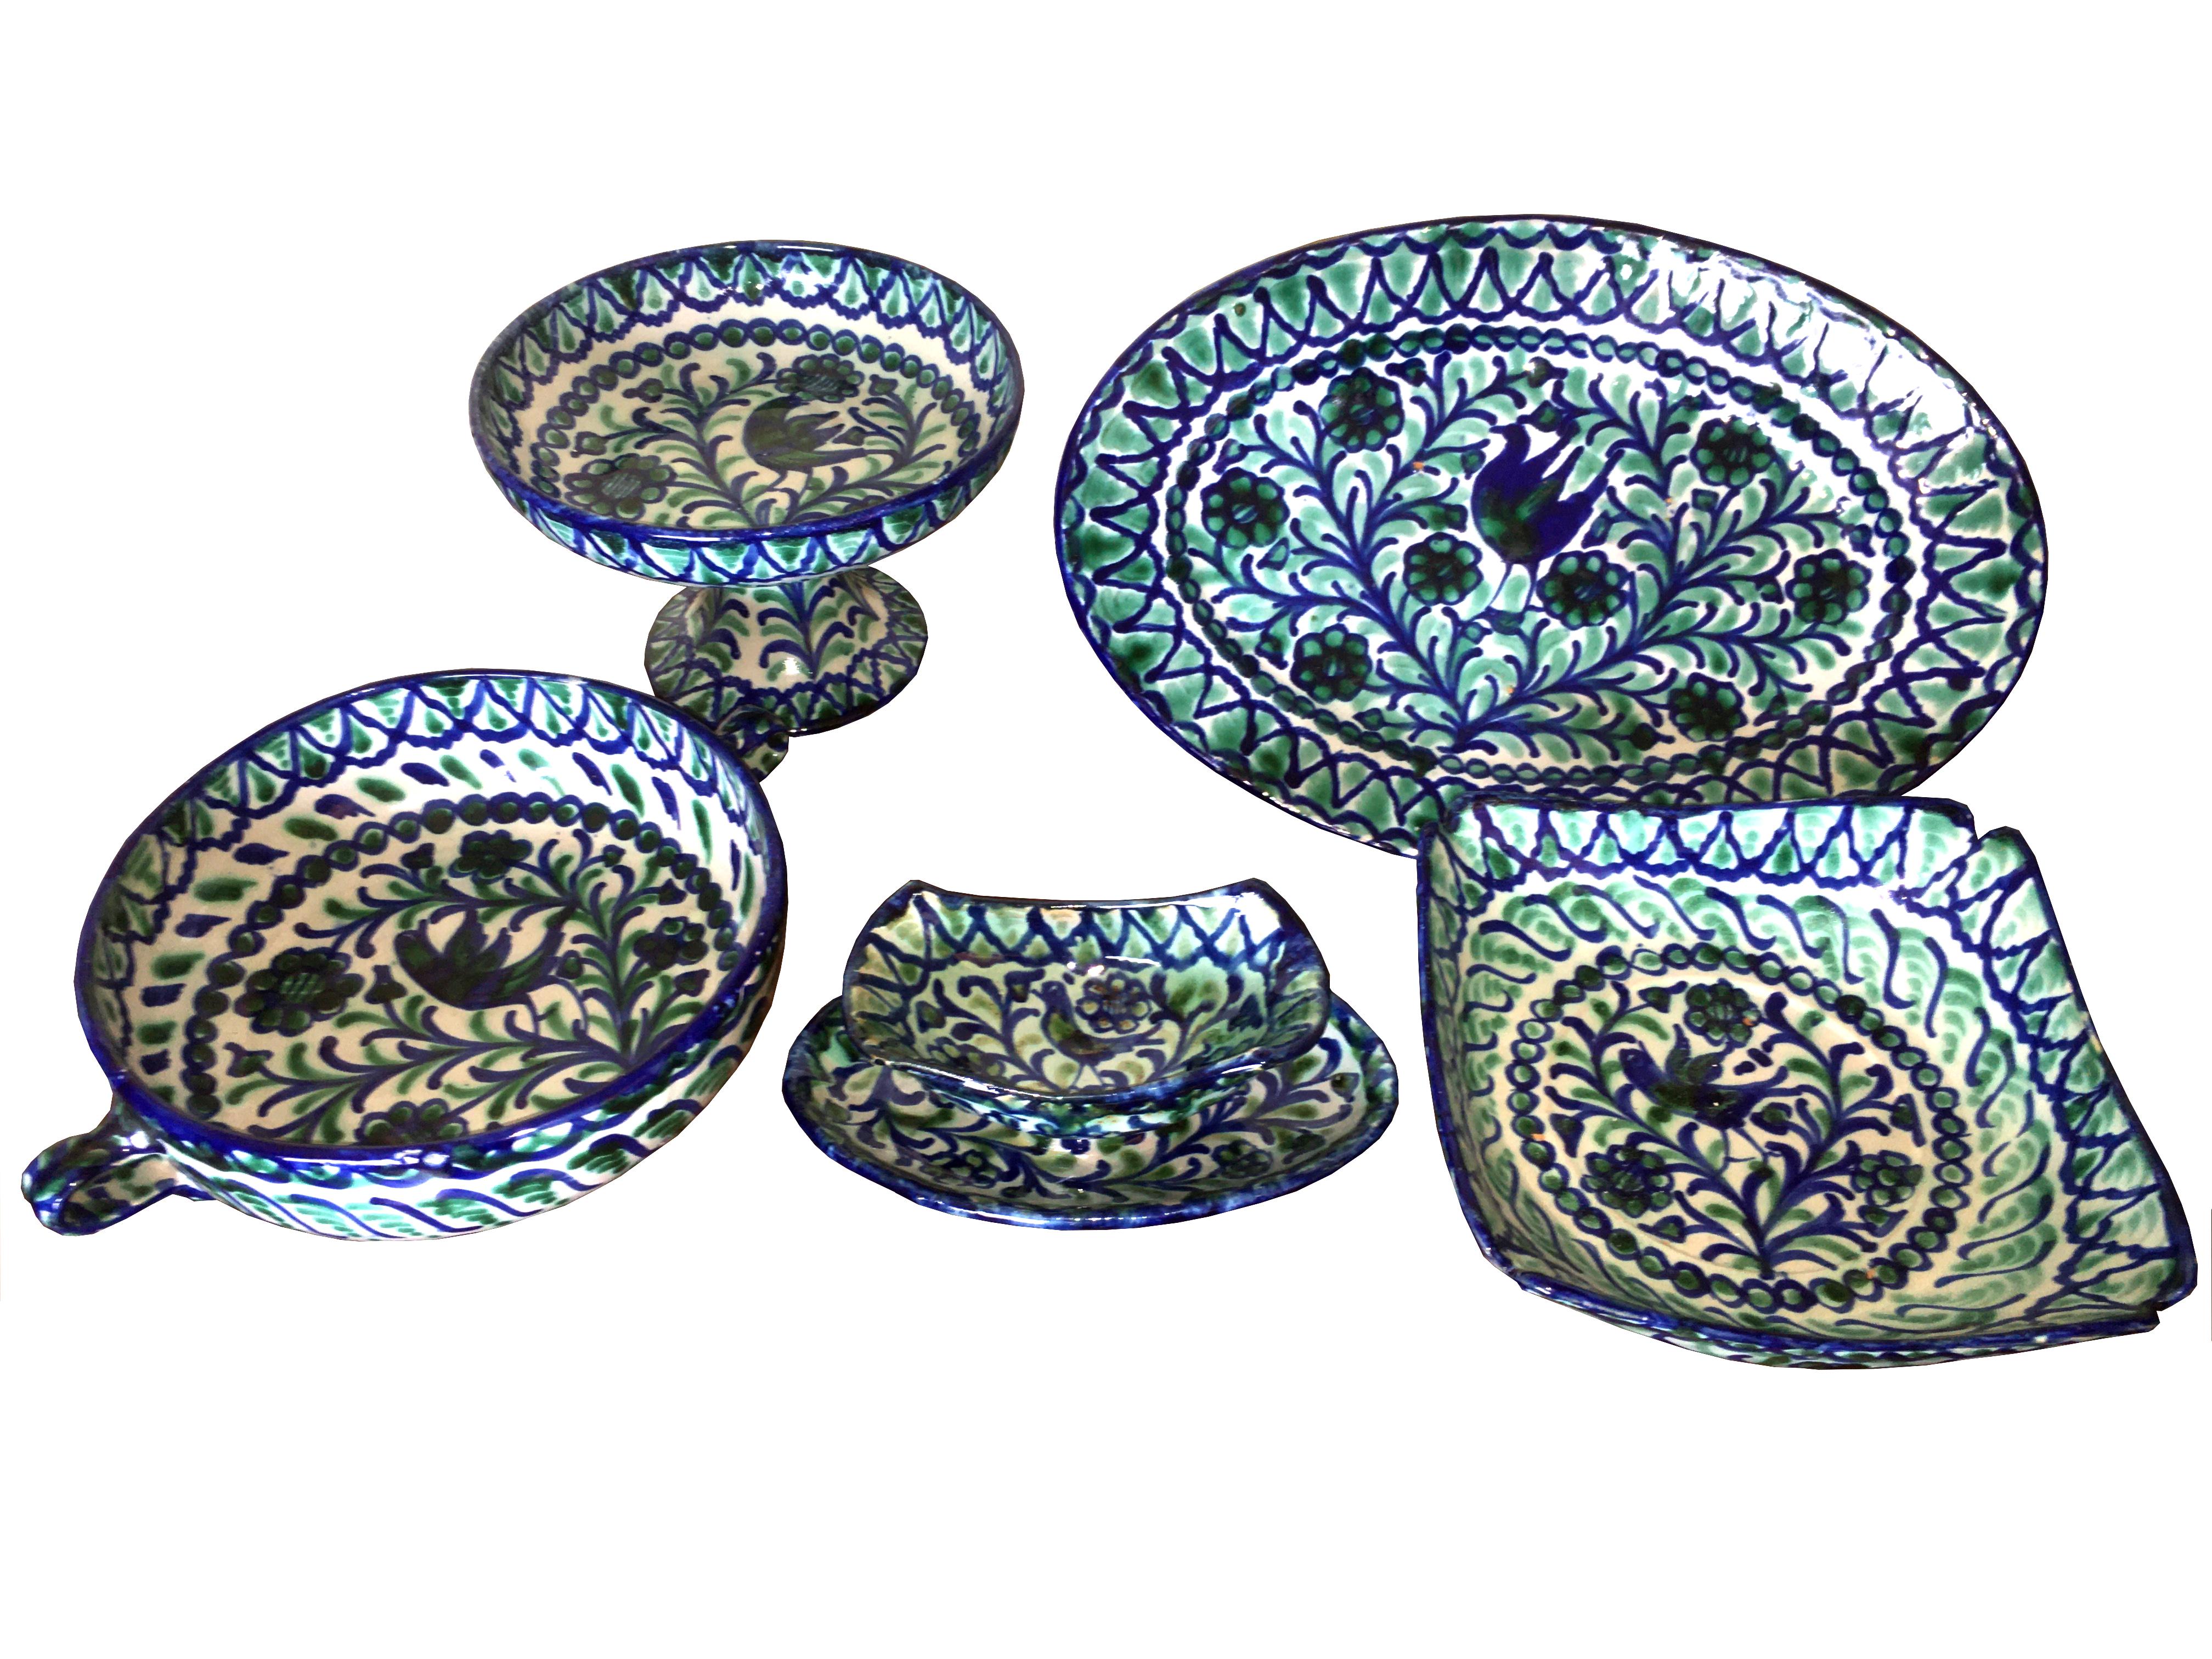 Set of 5 vintage serving dishes of blue and green Granada handmade Fajalauza with bird, flowers and geometric decoration. Fajalauza pottery is the popular pottery made of glazed and decorated earthenware, originally produced in the Albaicín area of